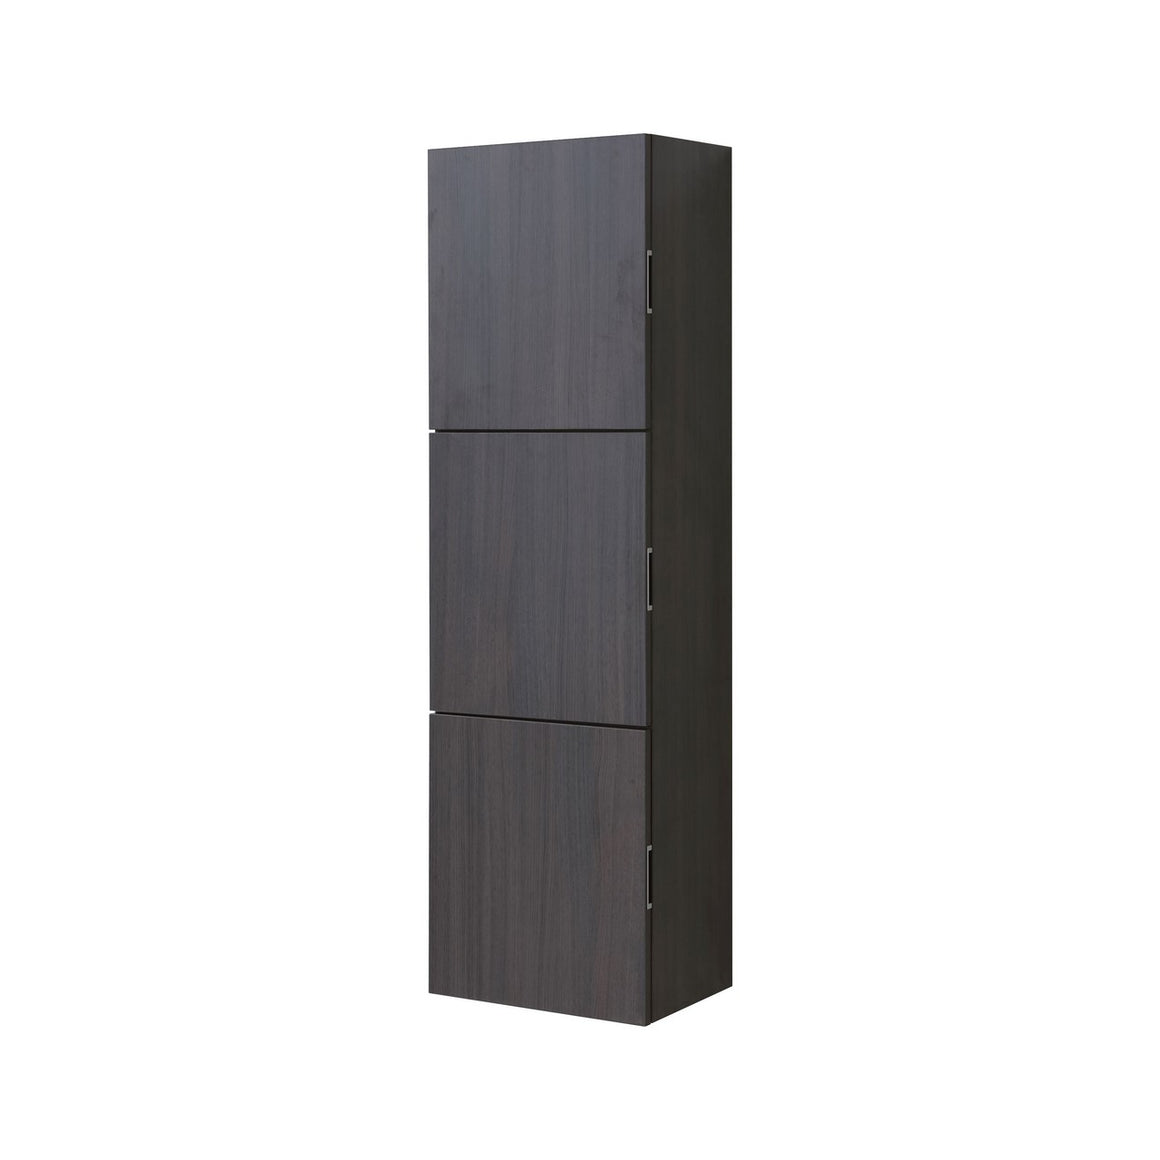 Bliss 18" Wide by 59" High Linen Side Cabinet With Three Doors in High Gloss Gray Oak Finish